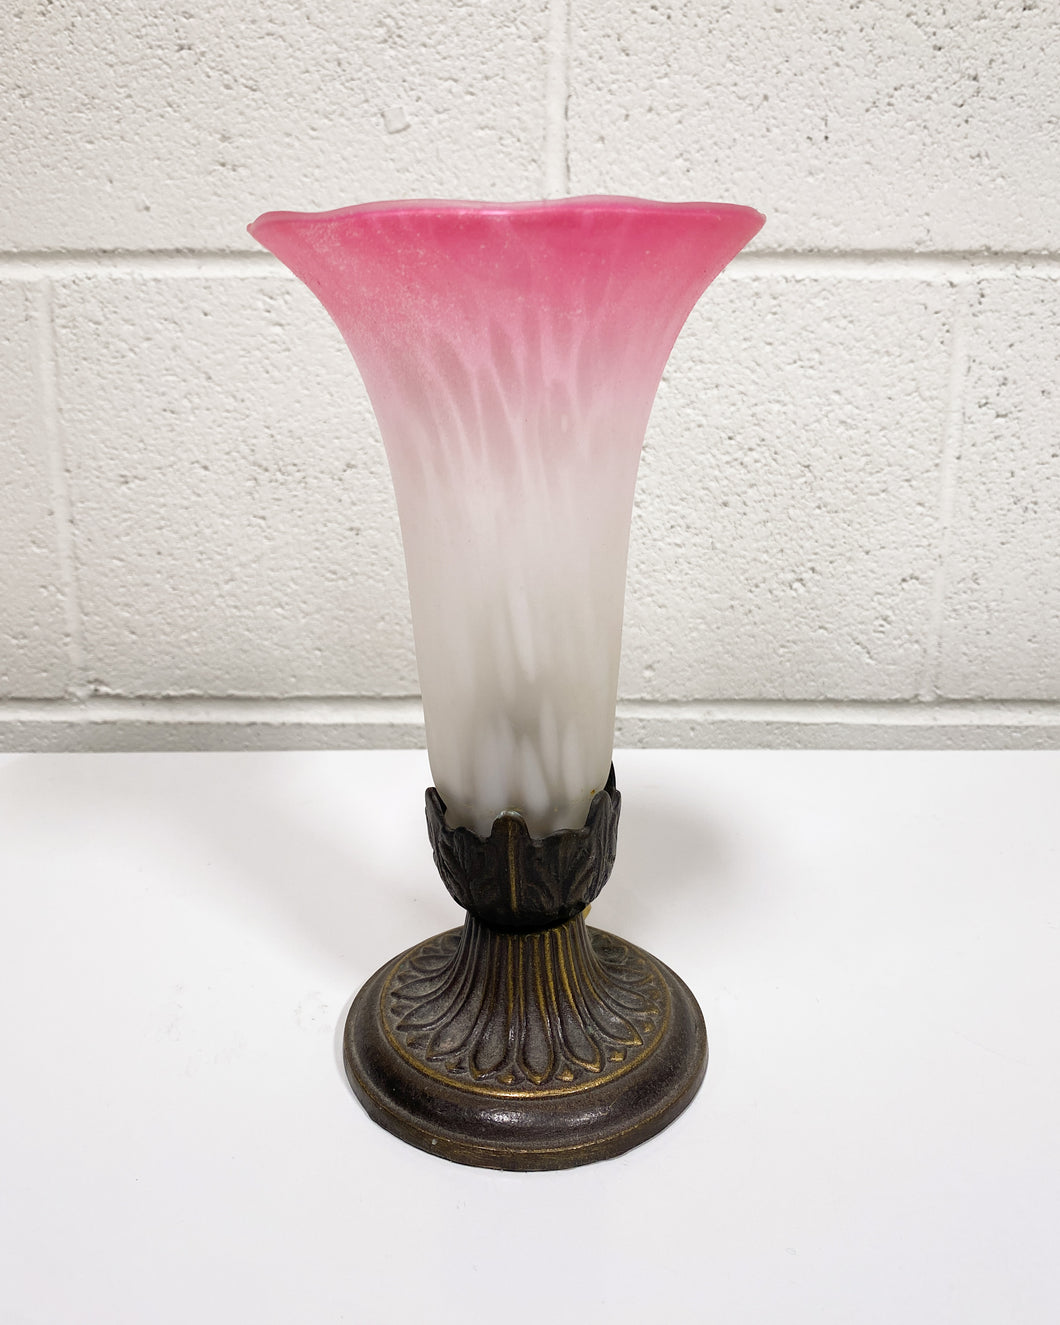 Vintage Lily Accent Lamp